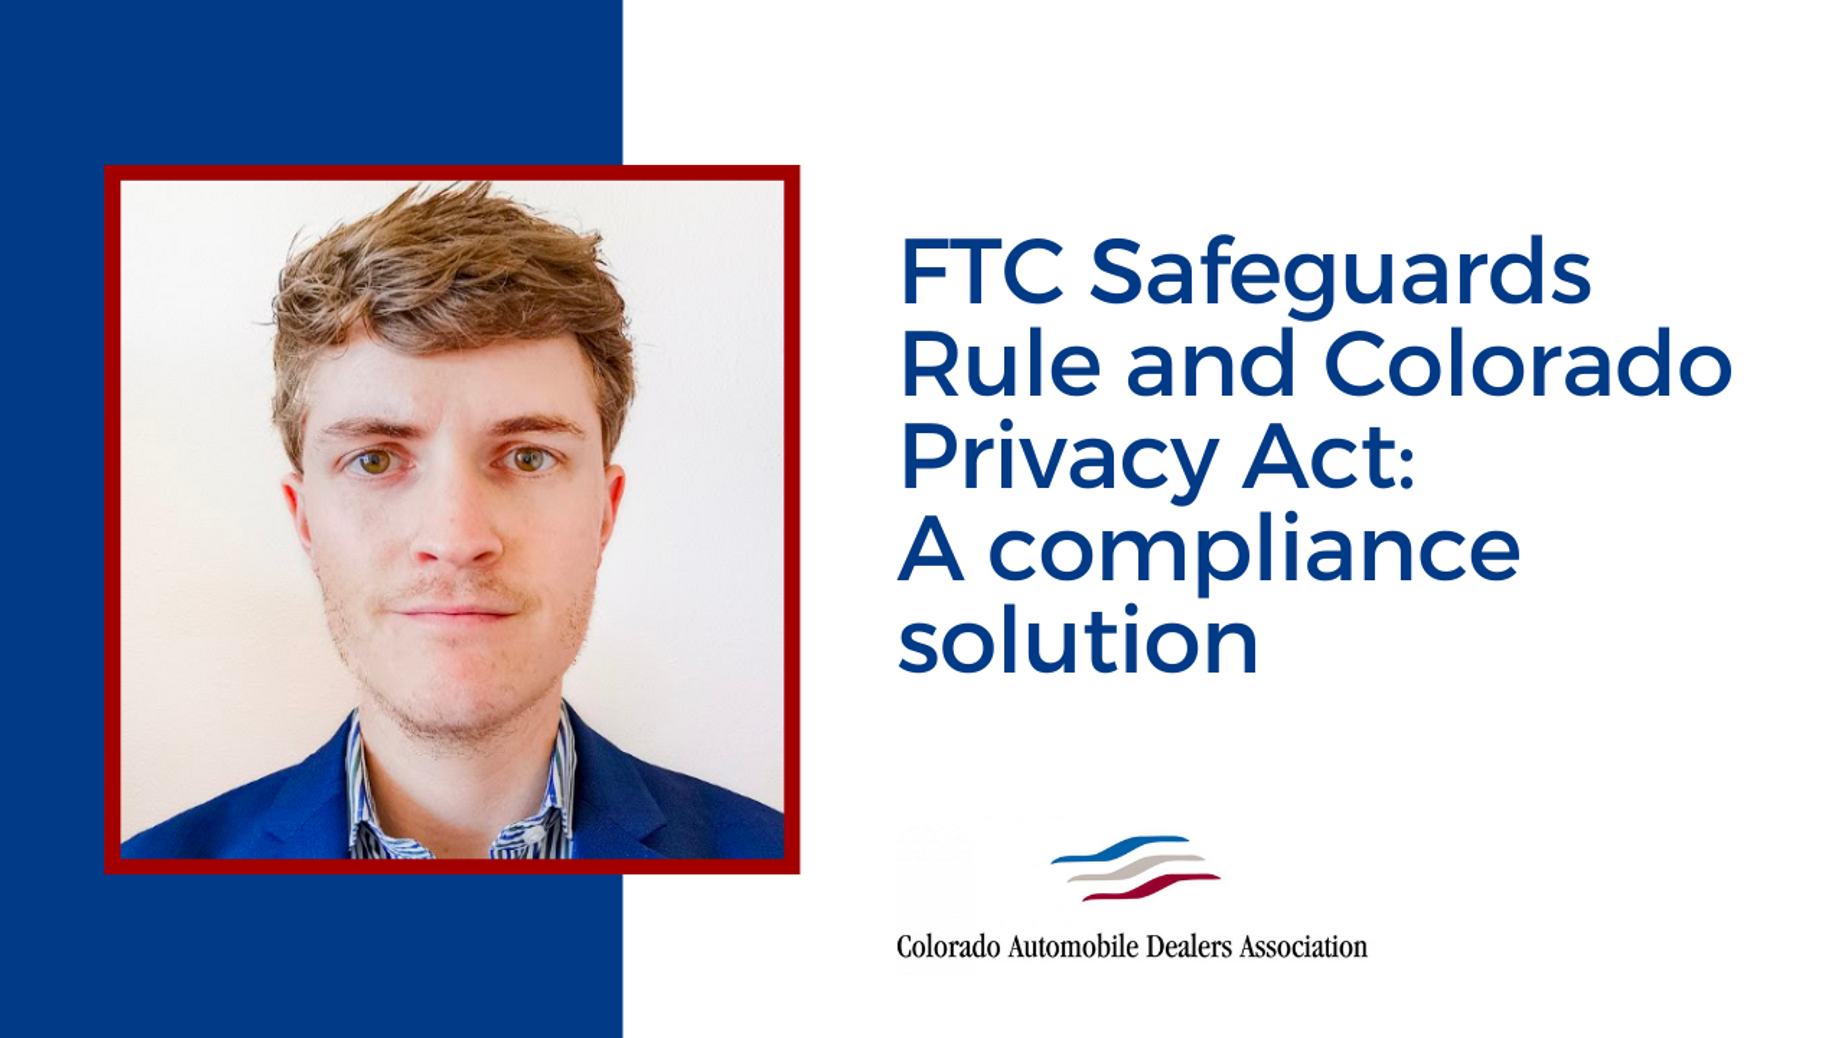 FTC Safeguards Rule and Colorado Privacy Act: A compliance solution